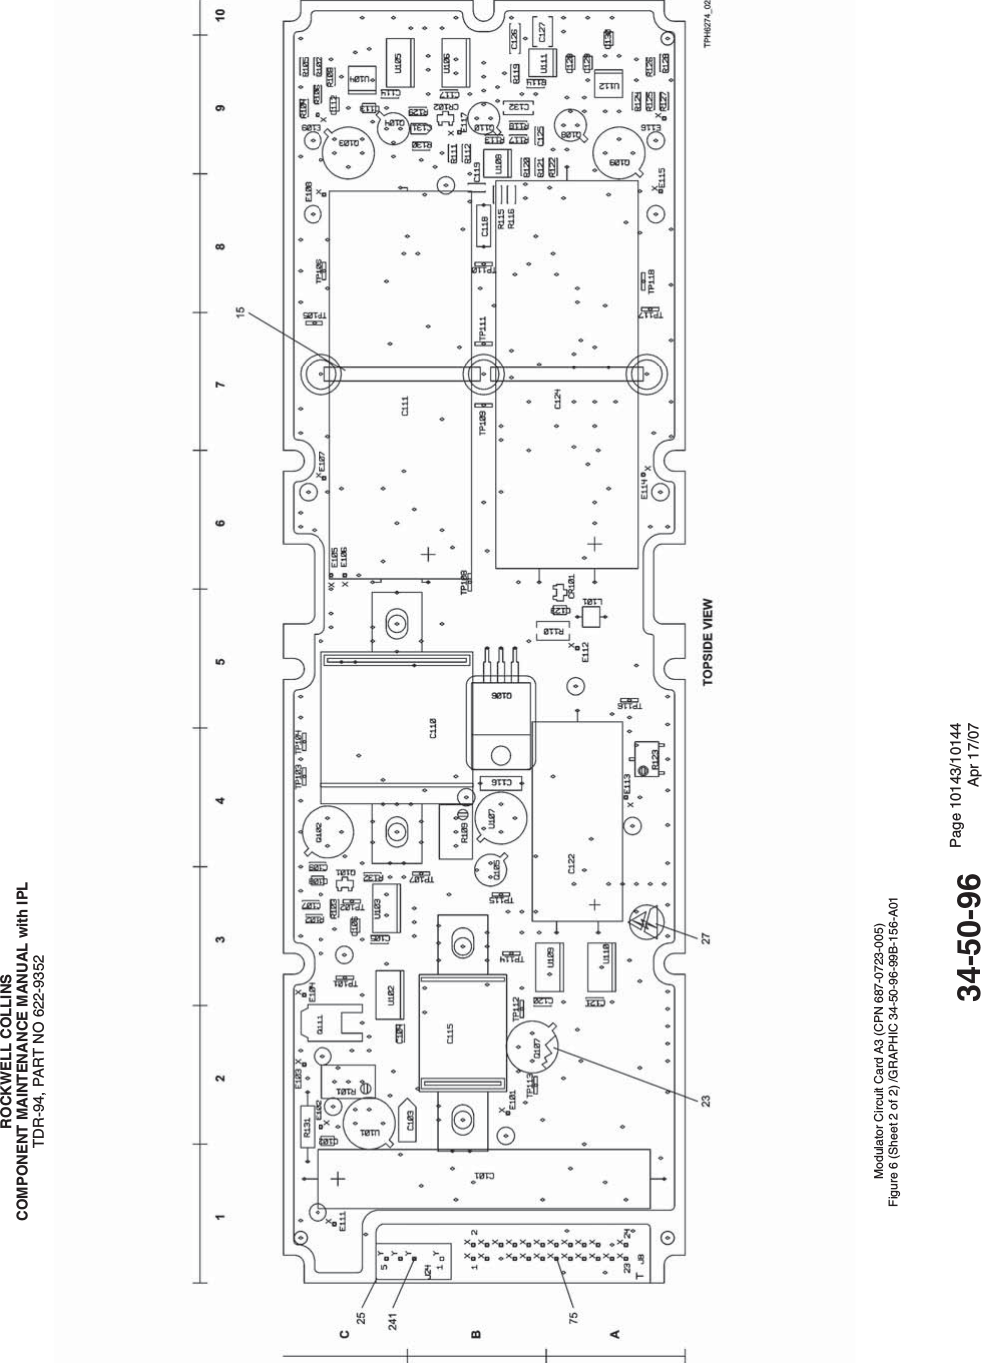 ROCKWELL COLLINSCOMPONENT MAINTENANCE MANUAL with IPLTDR-94, PART NO 622-9352Modulator Circuit Card A3 (CPN 687-0723-005)Figure 6 (Sheet 2 of 2) /GRAPHIC 34-50-96-99B-156-A0134-50-96 Page 10143/10144Apr 17/07